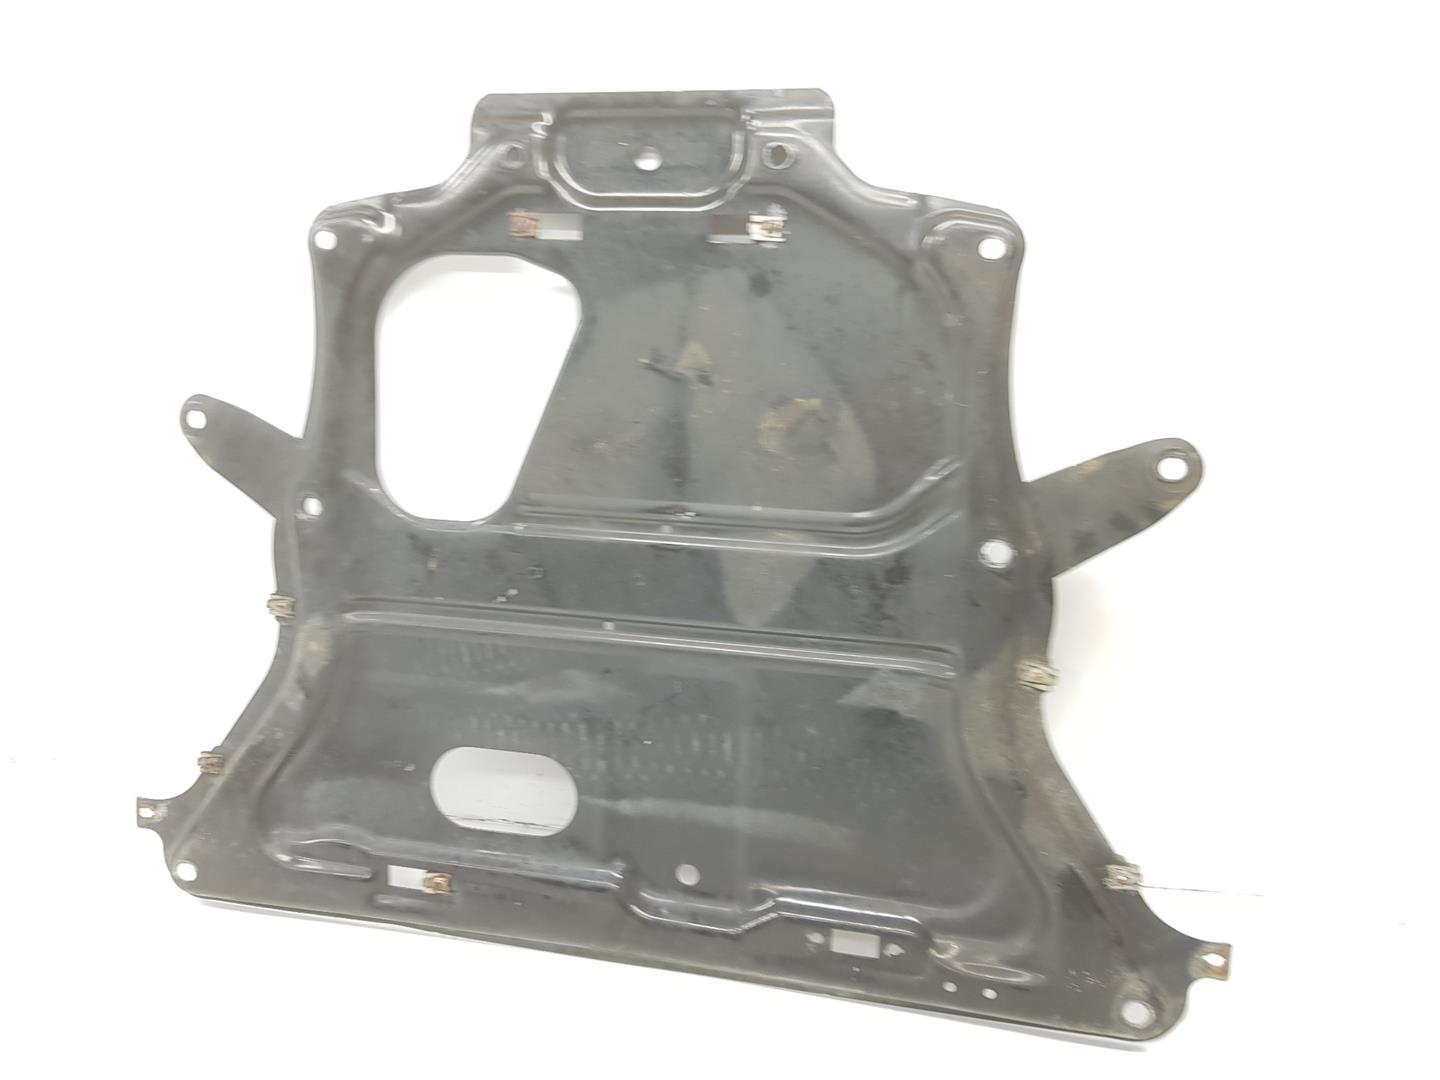 BMW 4 Series F32/F33/F36 (2013-2020) Front Engine Cover 51757241818, 51757241818 24155880